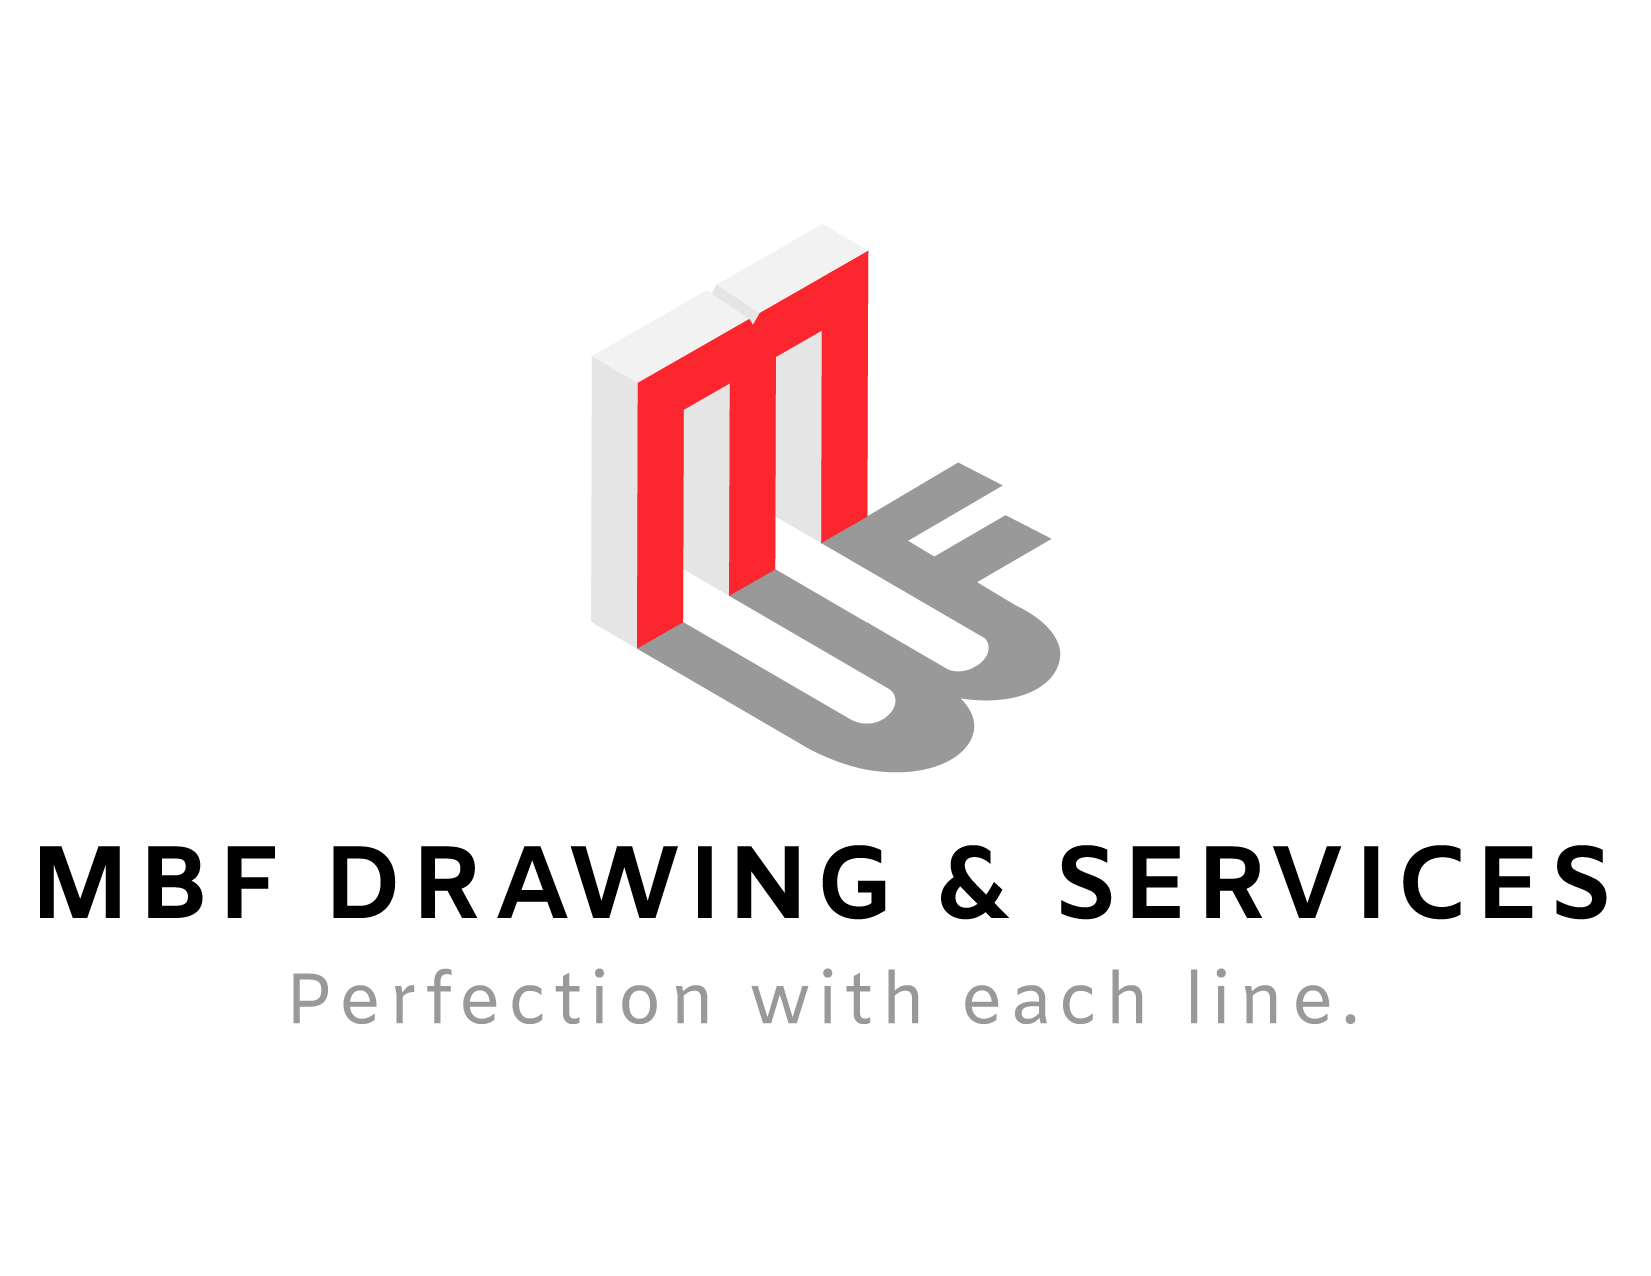 MBF Drawing & Services Logo